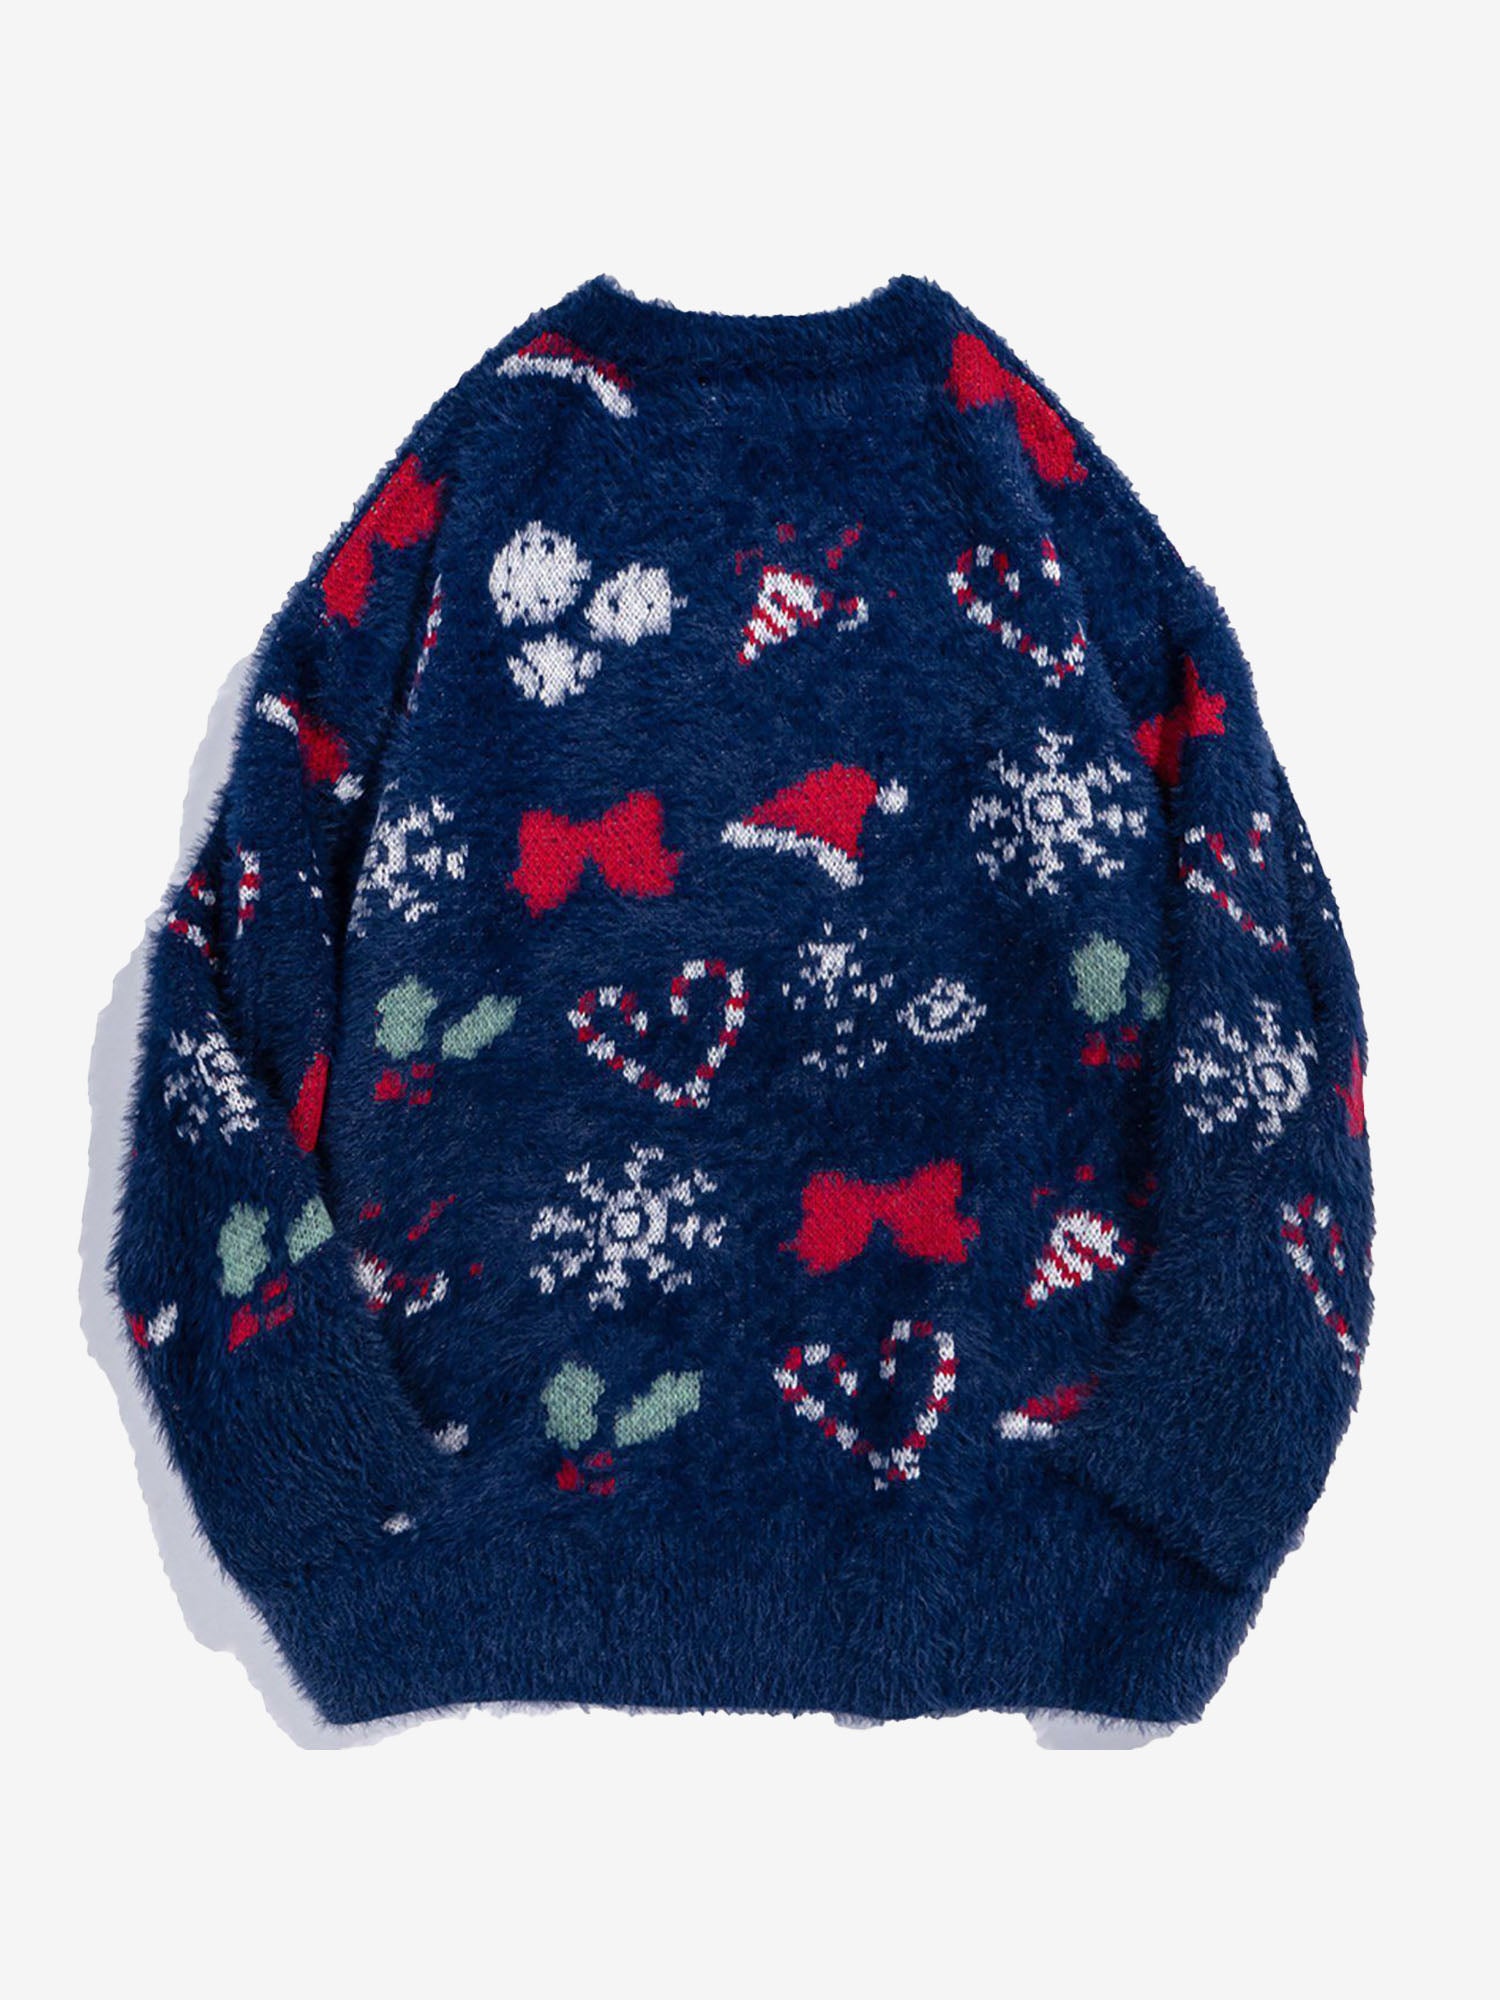 JUSTNOTAG Christmas Elements Printed Knitted Sweater